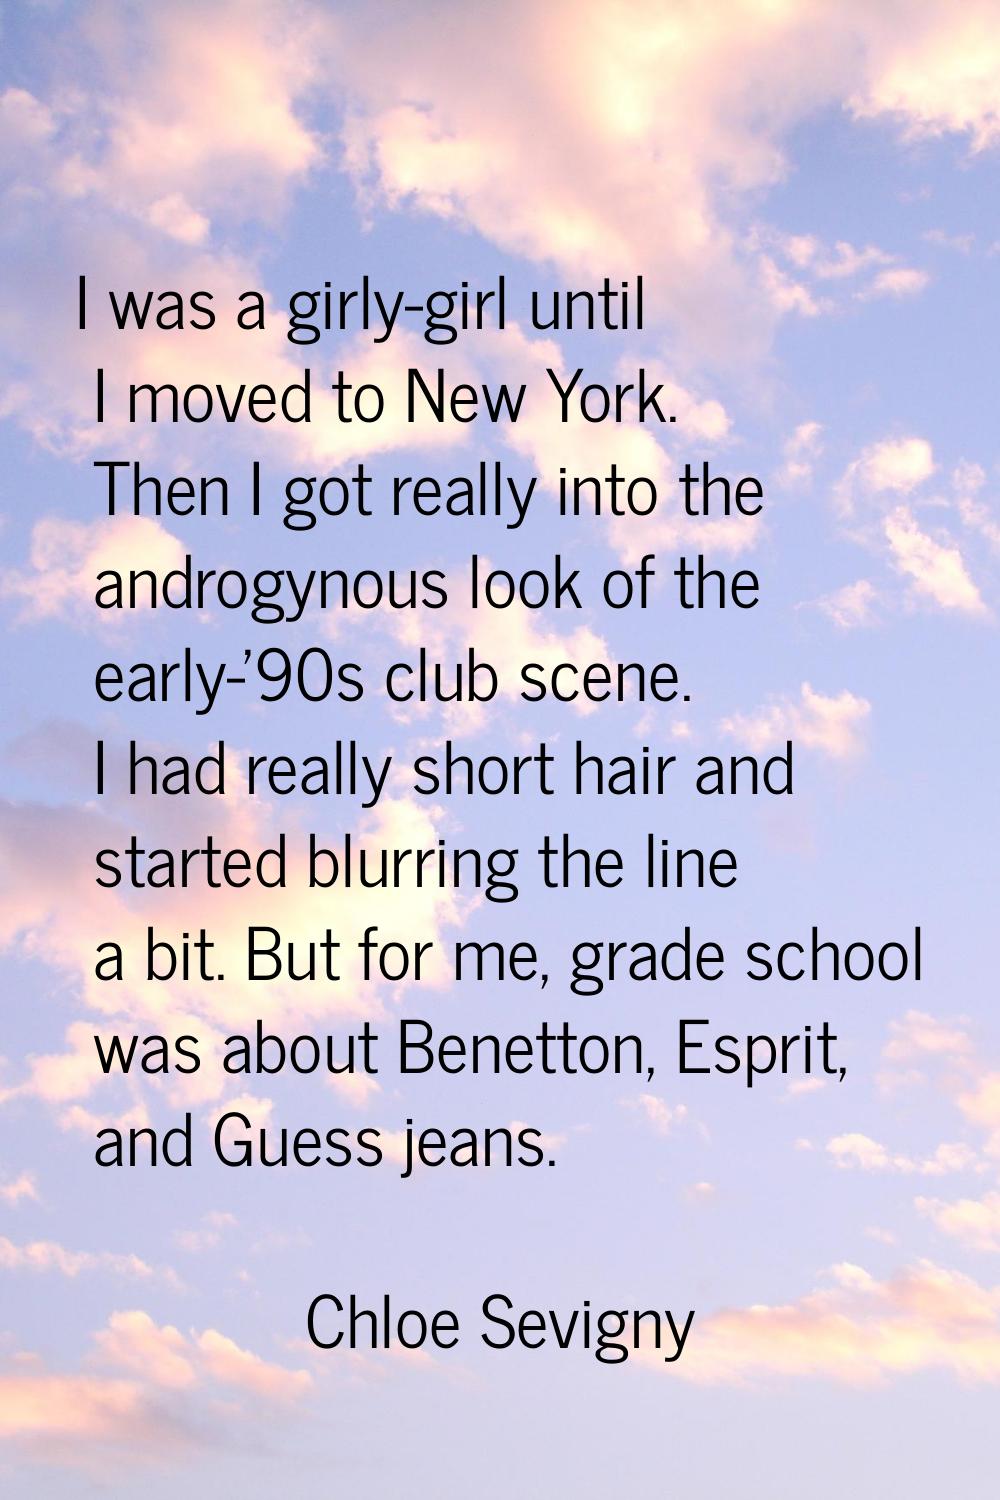 I was a girly-girl until I moved to New York. Then I got really into the androgynous look of the ea